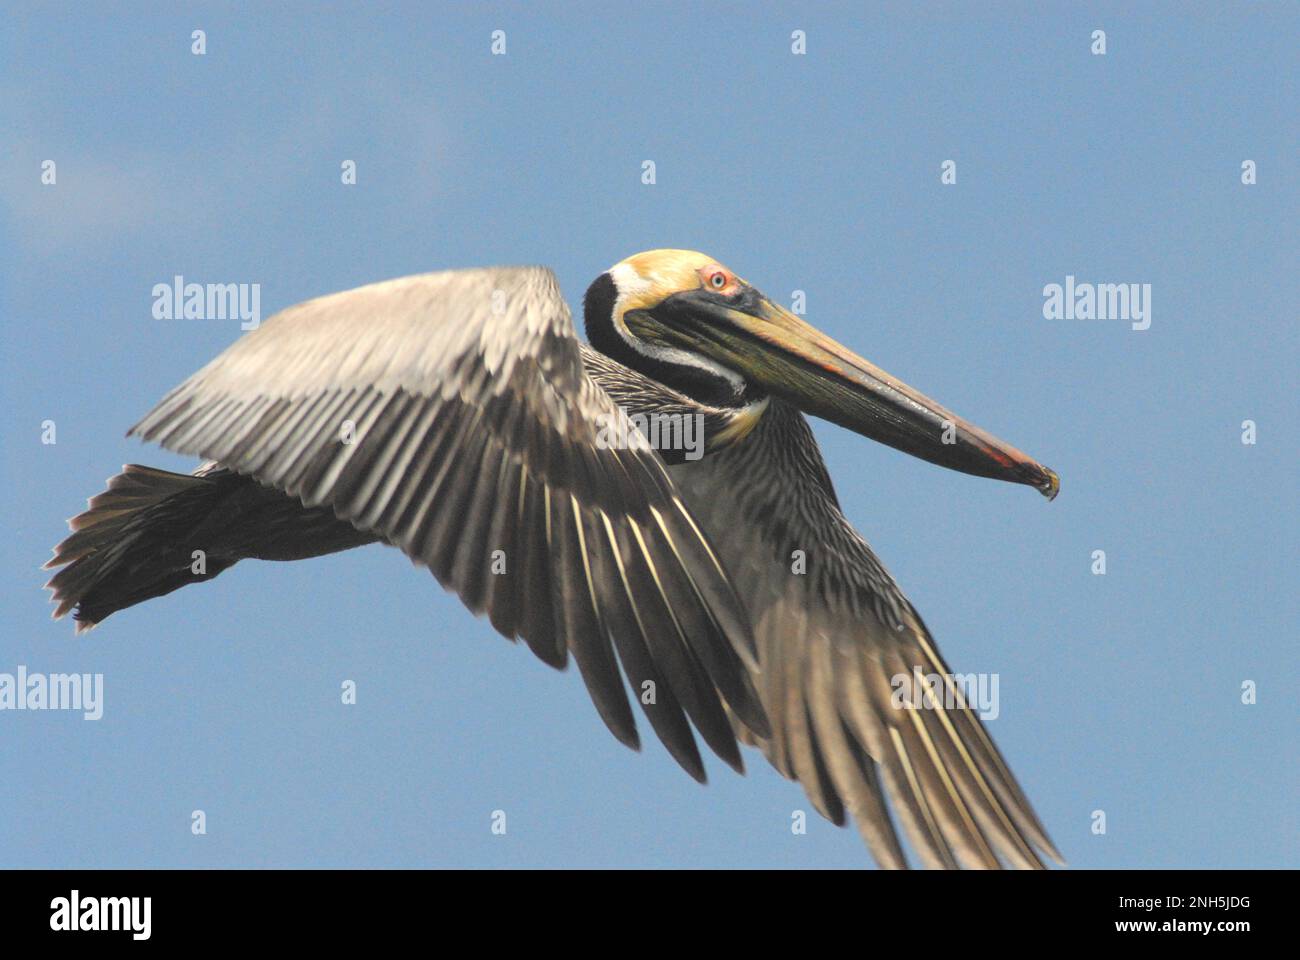 Close up of a beautiful Florida Brown Pelican flying in a clear blue sky.  Note the colorful mating plumage. Stock Photo